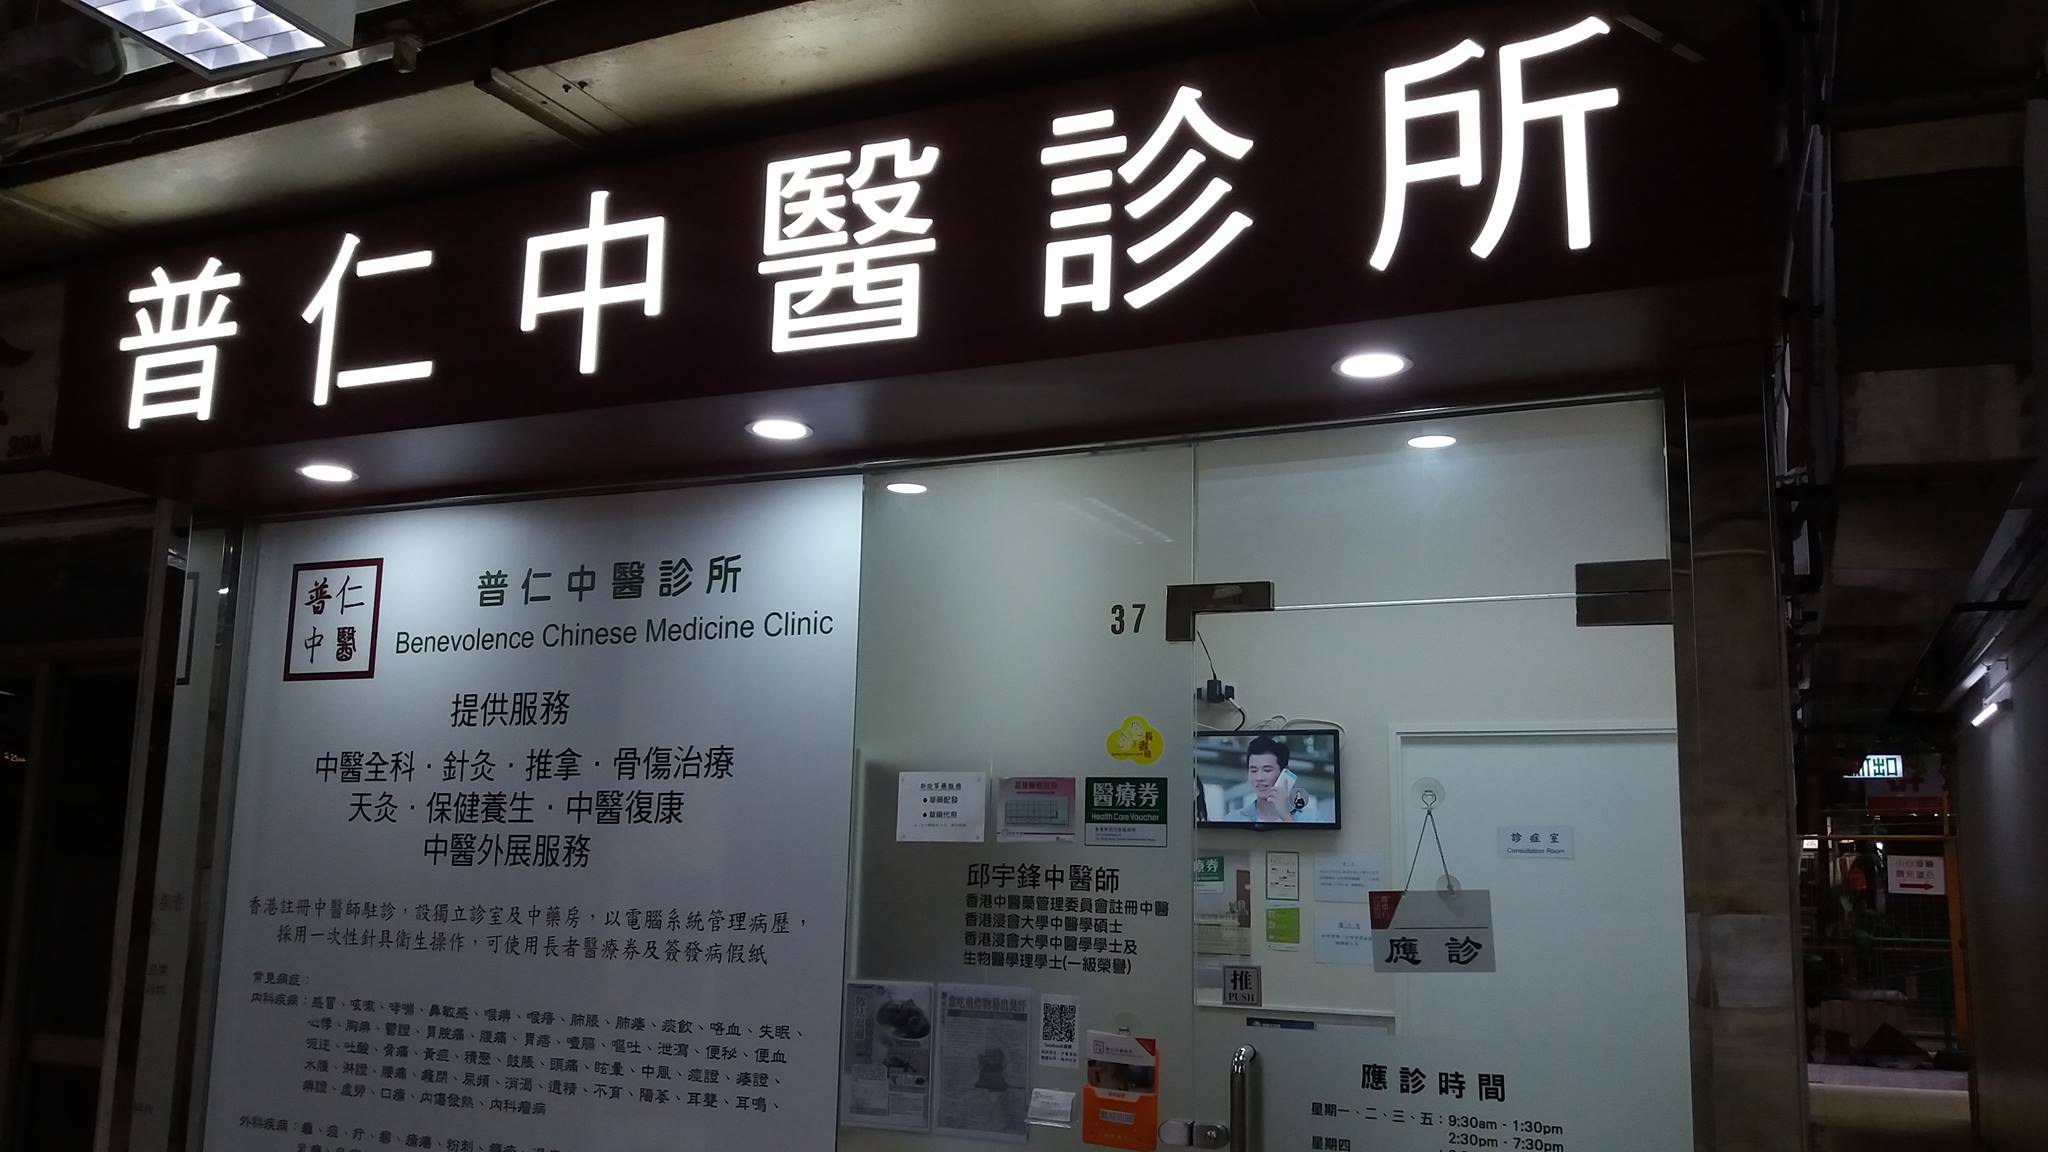 Traditional Chinese Medicine Clinic: 普仁中醫診所